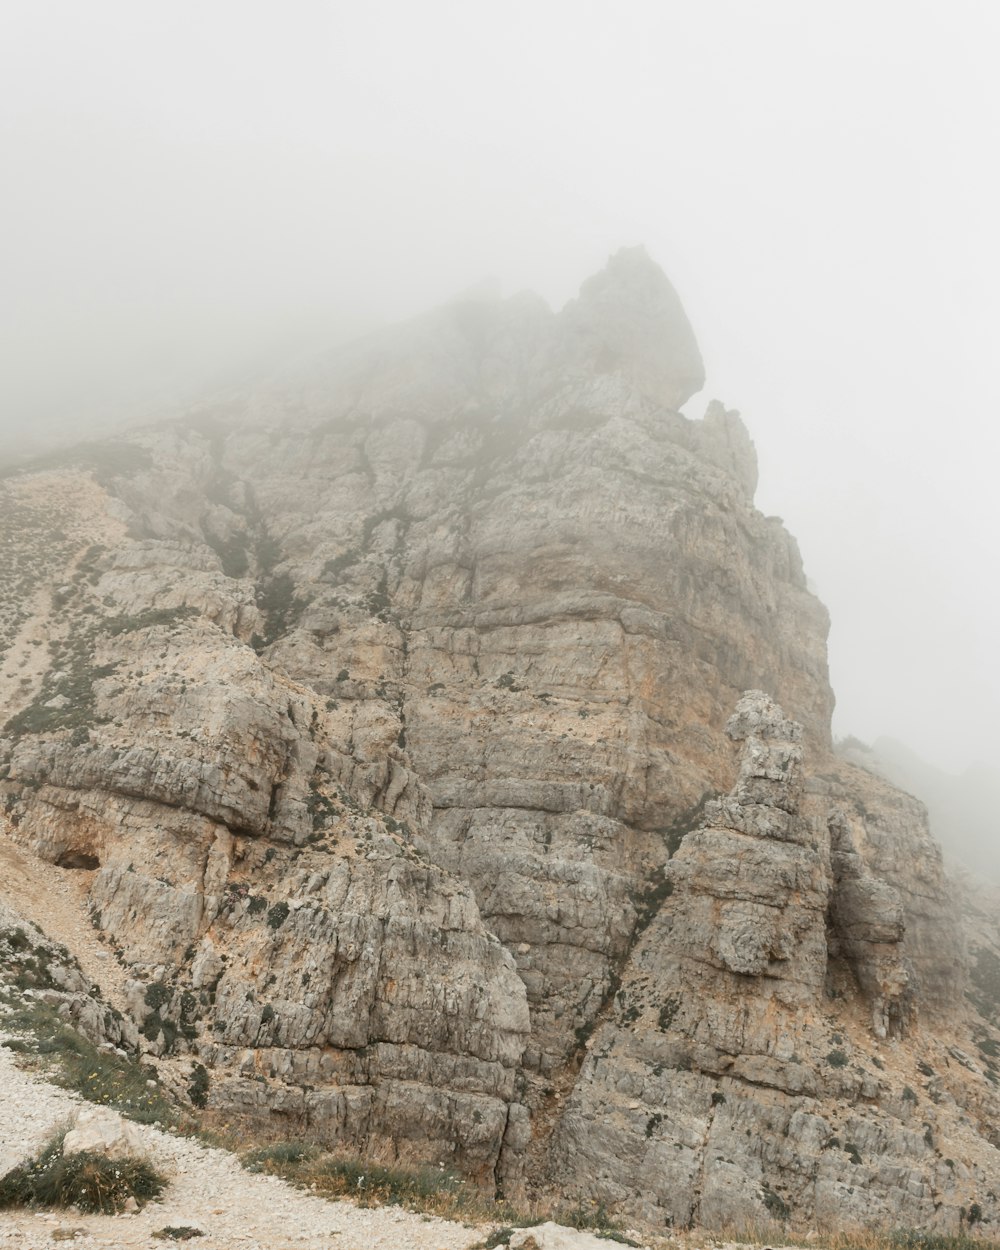 a foggy mountain with rocks and plants in the foreground